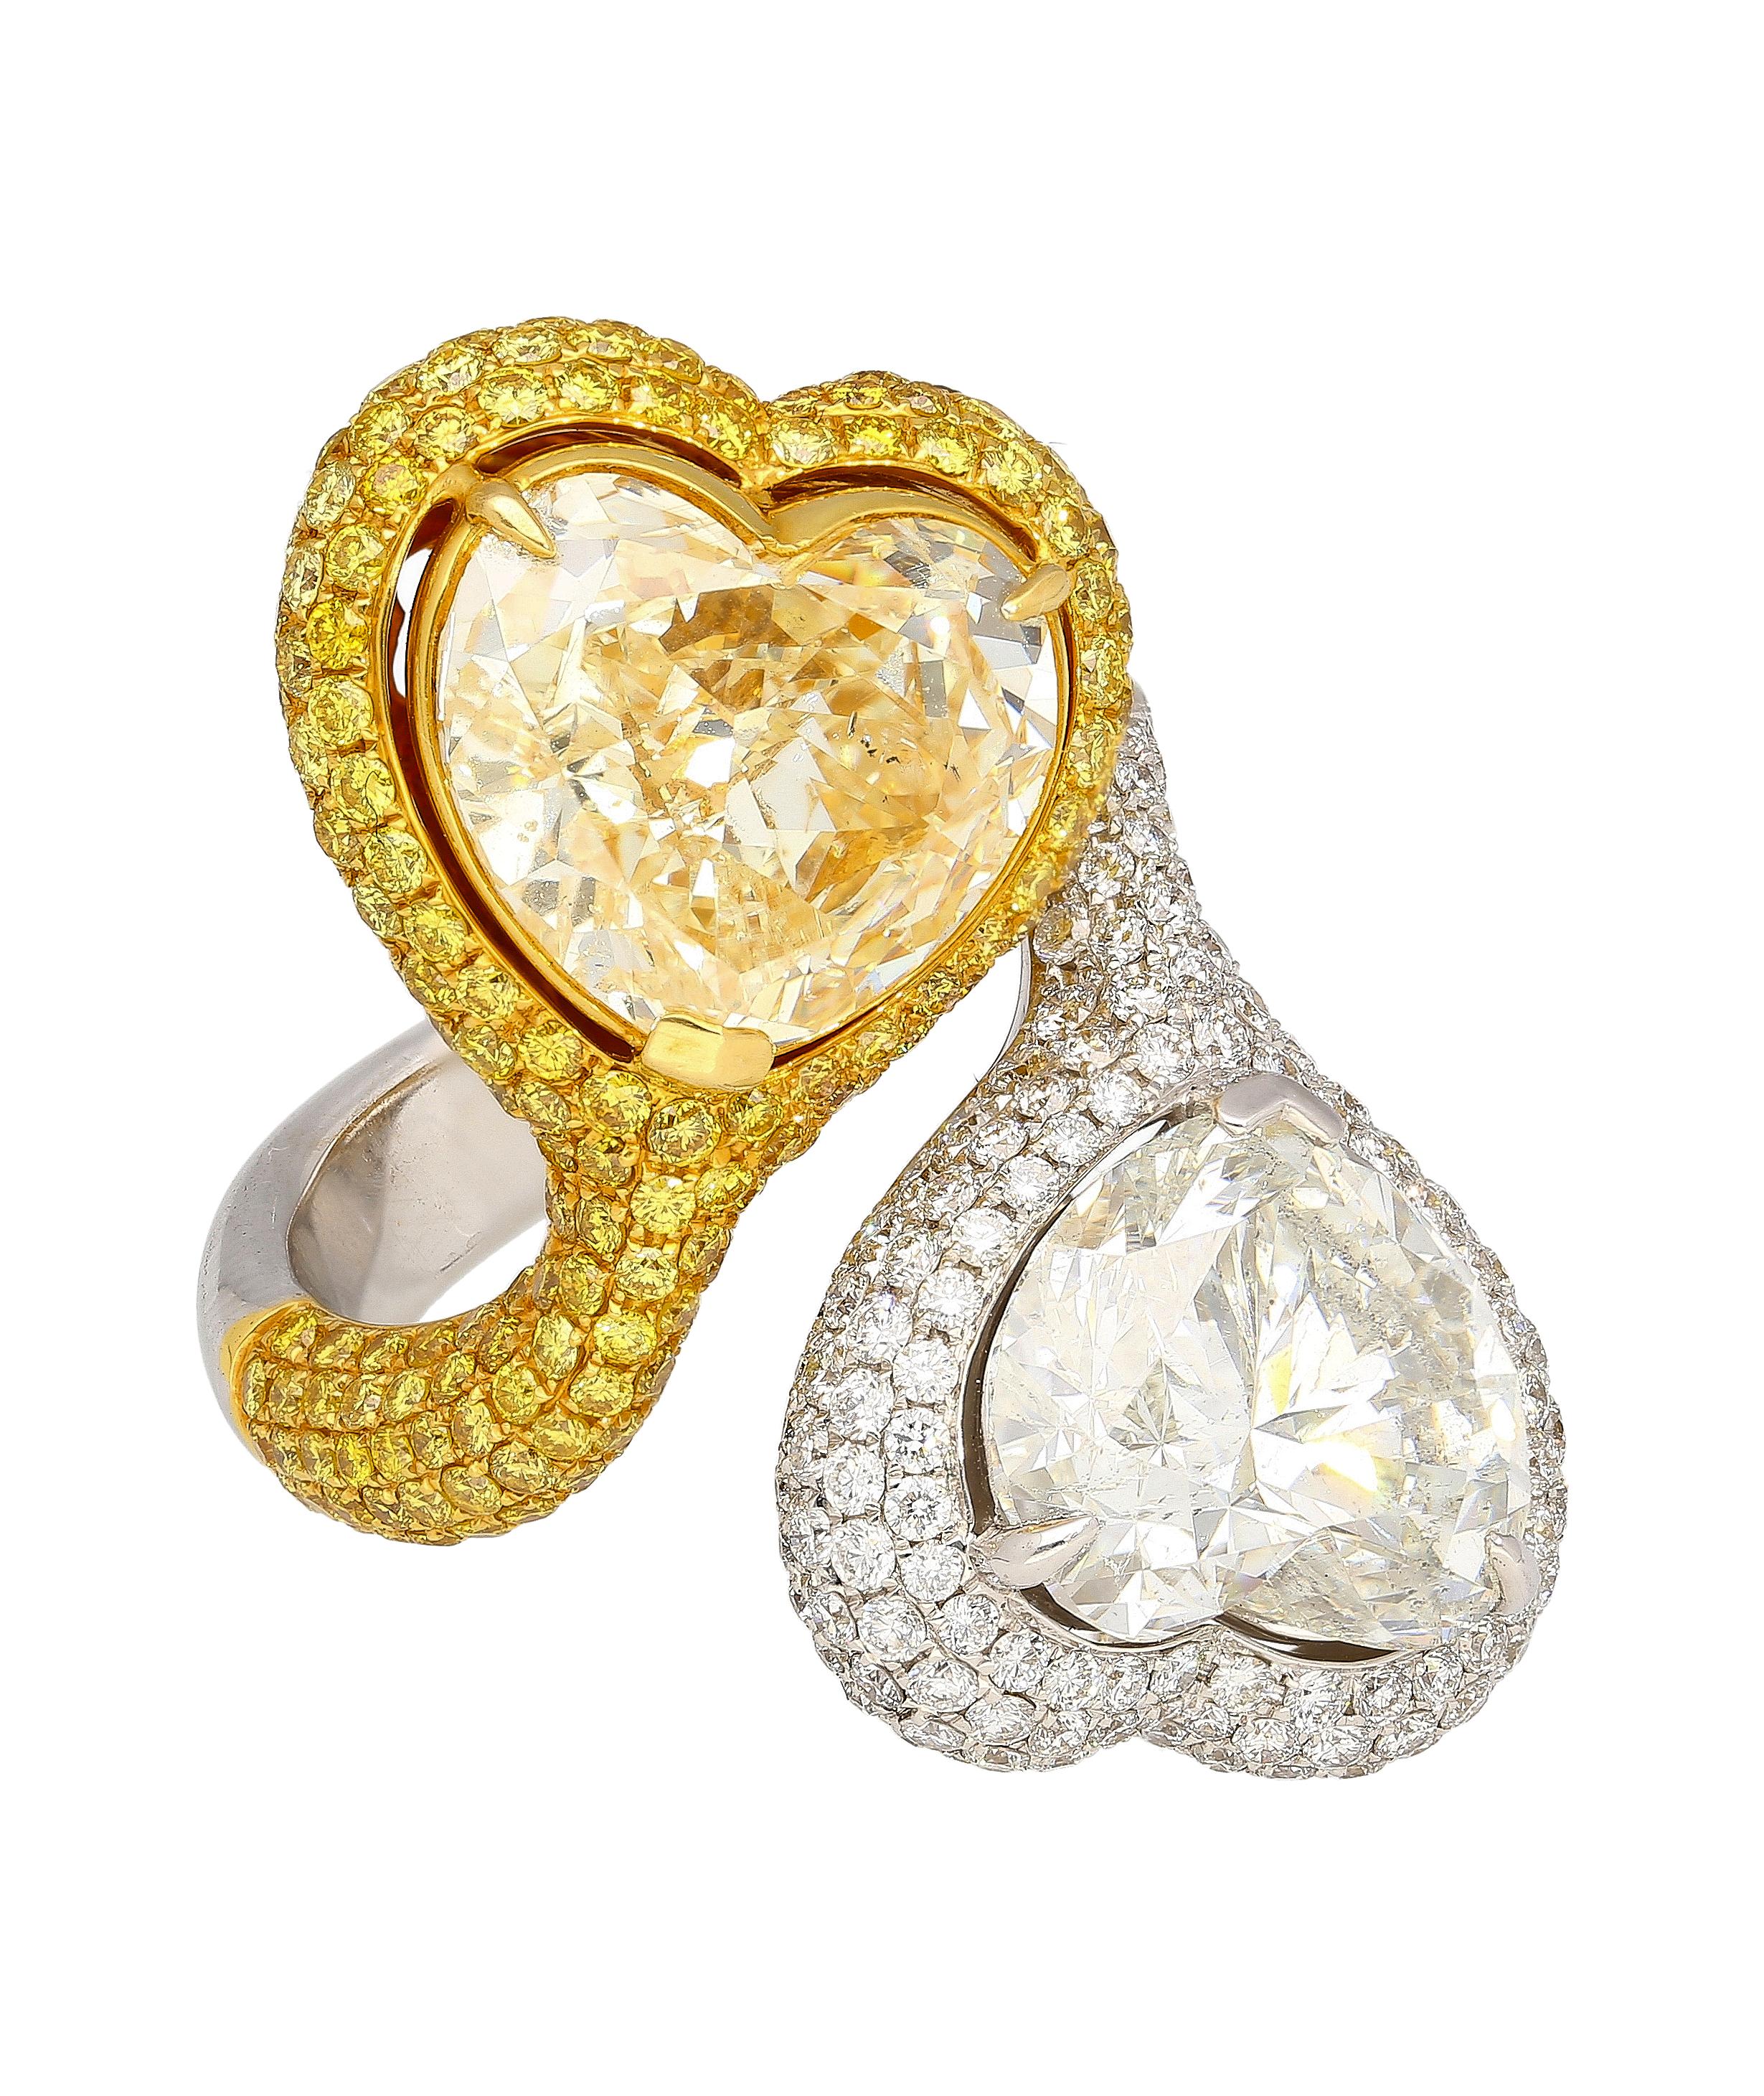 Heart Cut 5.79 & 5.73 Carat Fancy Yellow and White Diamond Toi Et Moi Ring For Sale 1